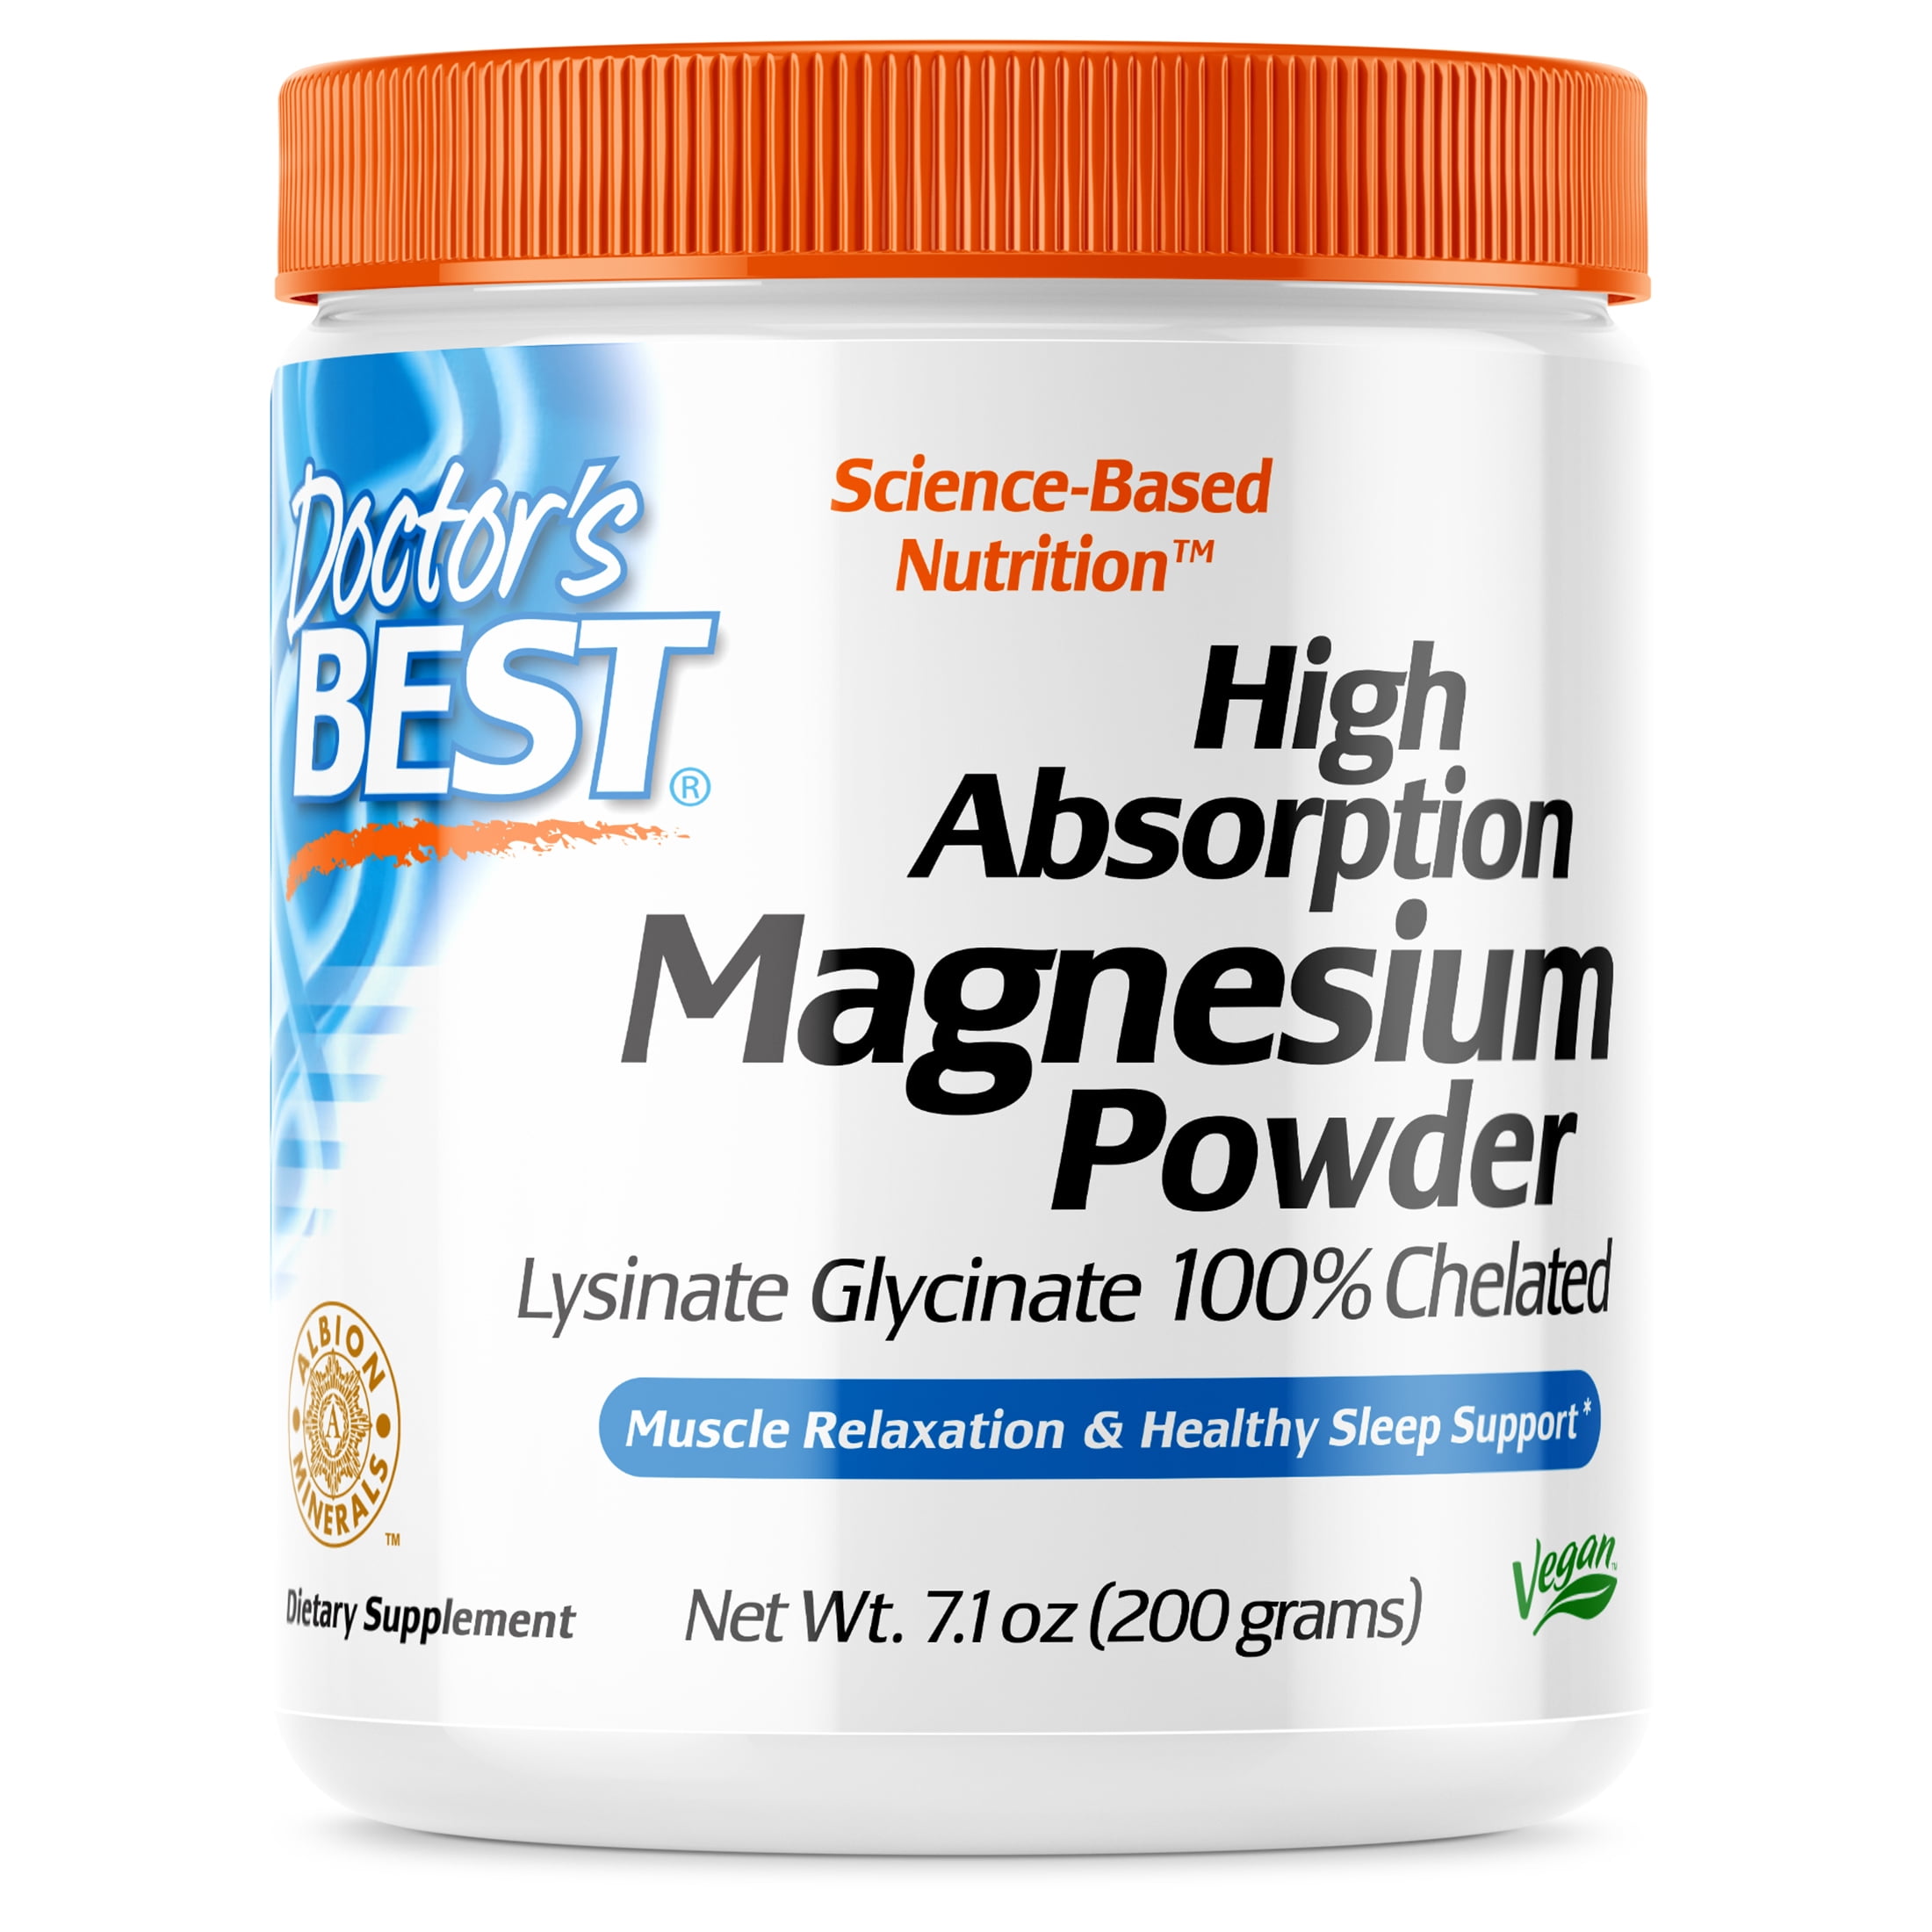 Harness the Power of Magnesium Supplements to Reverse Diabetes